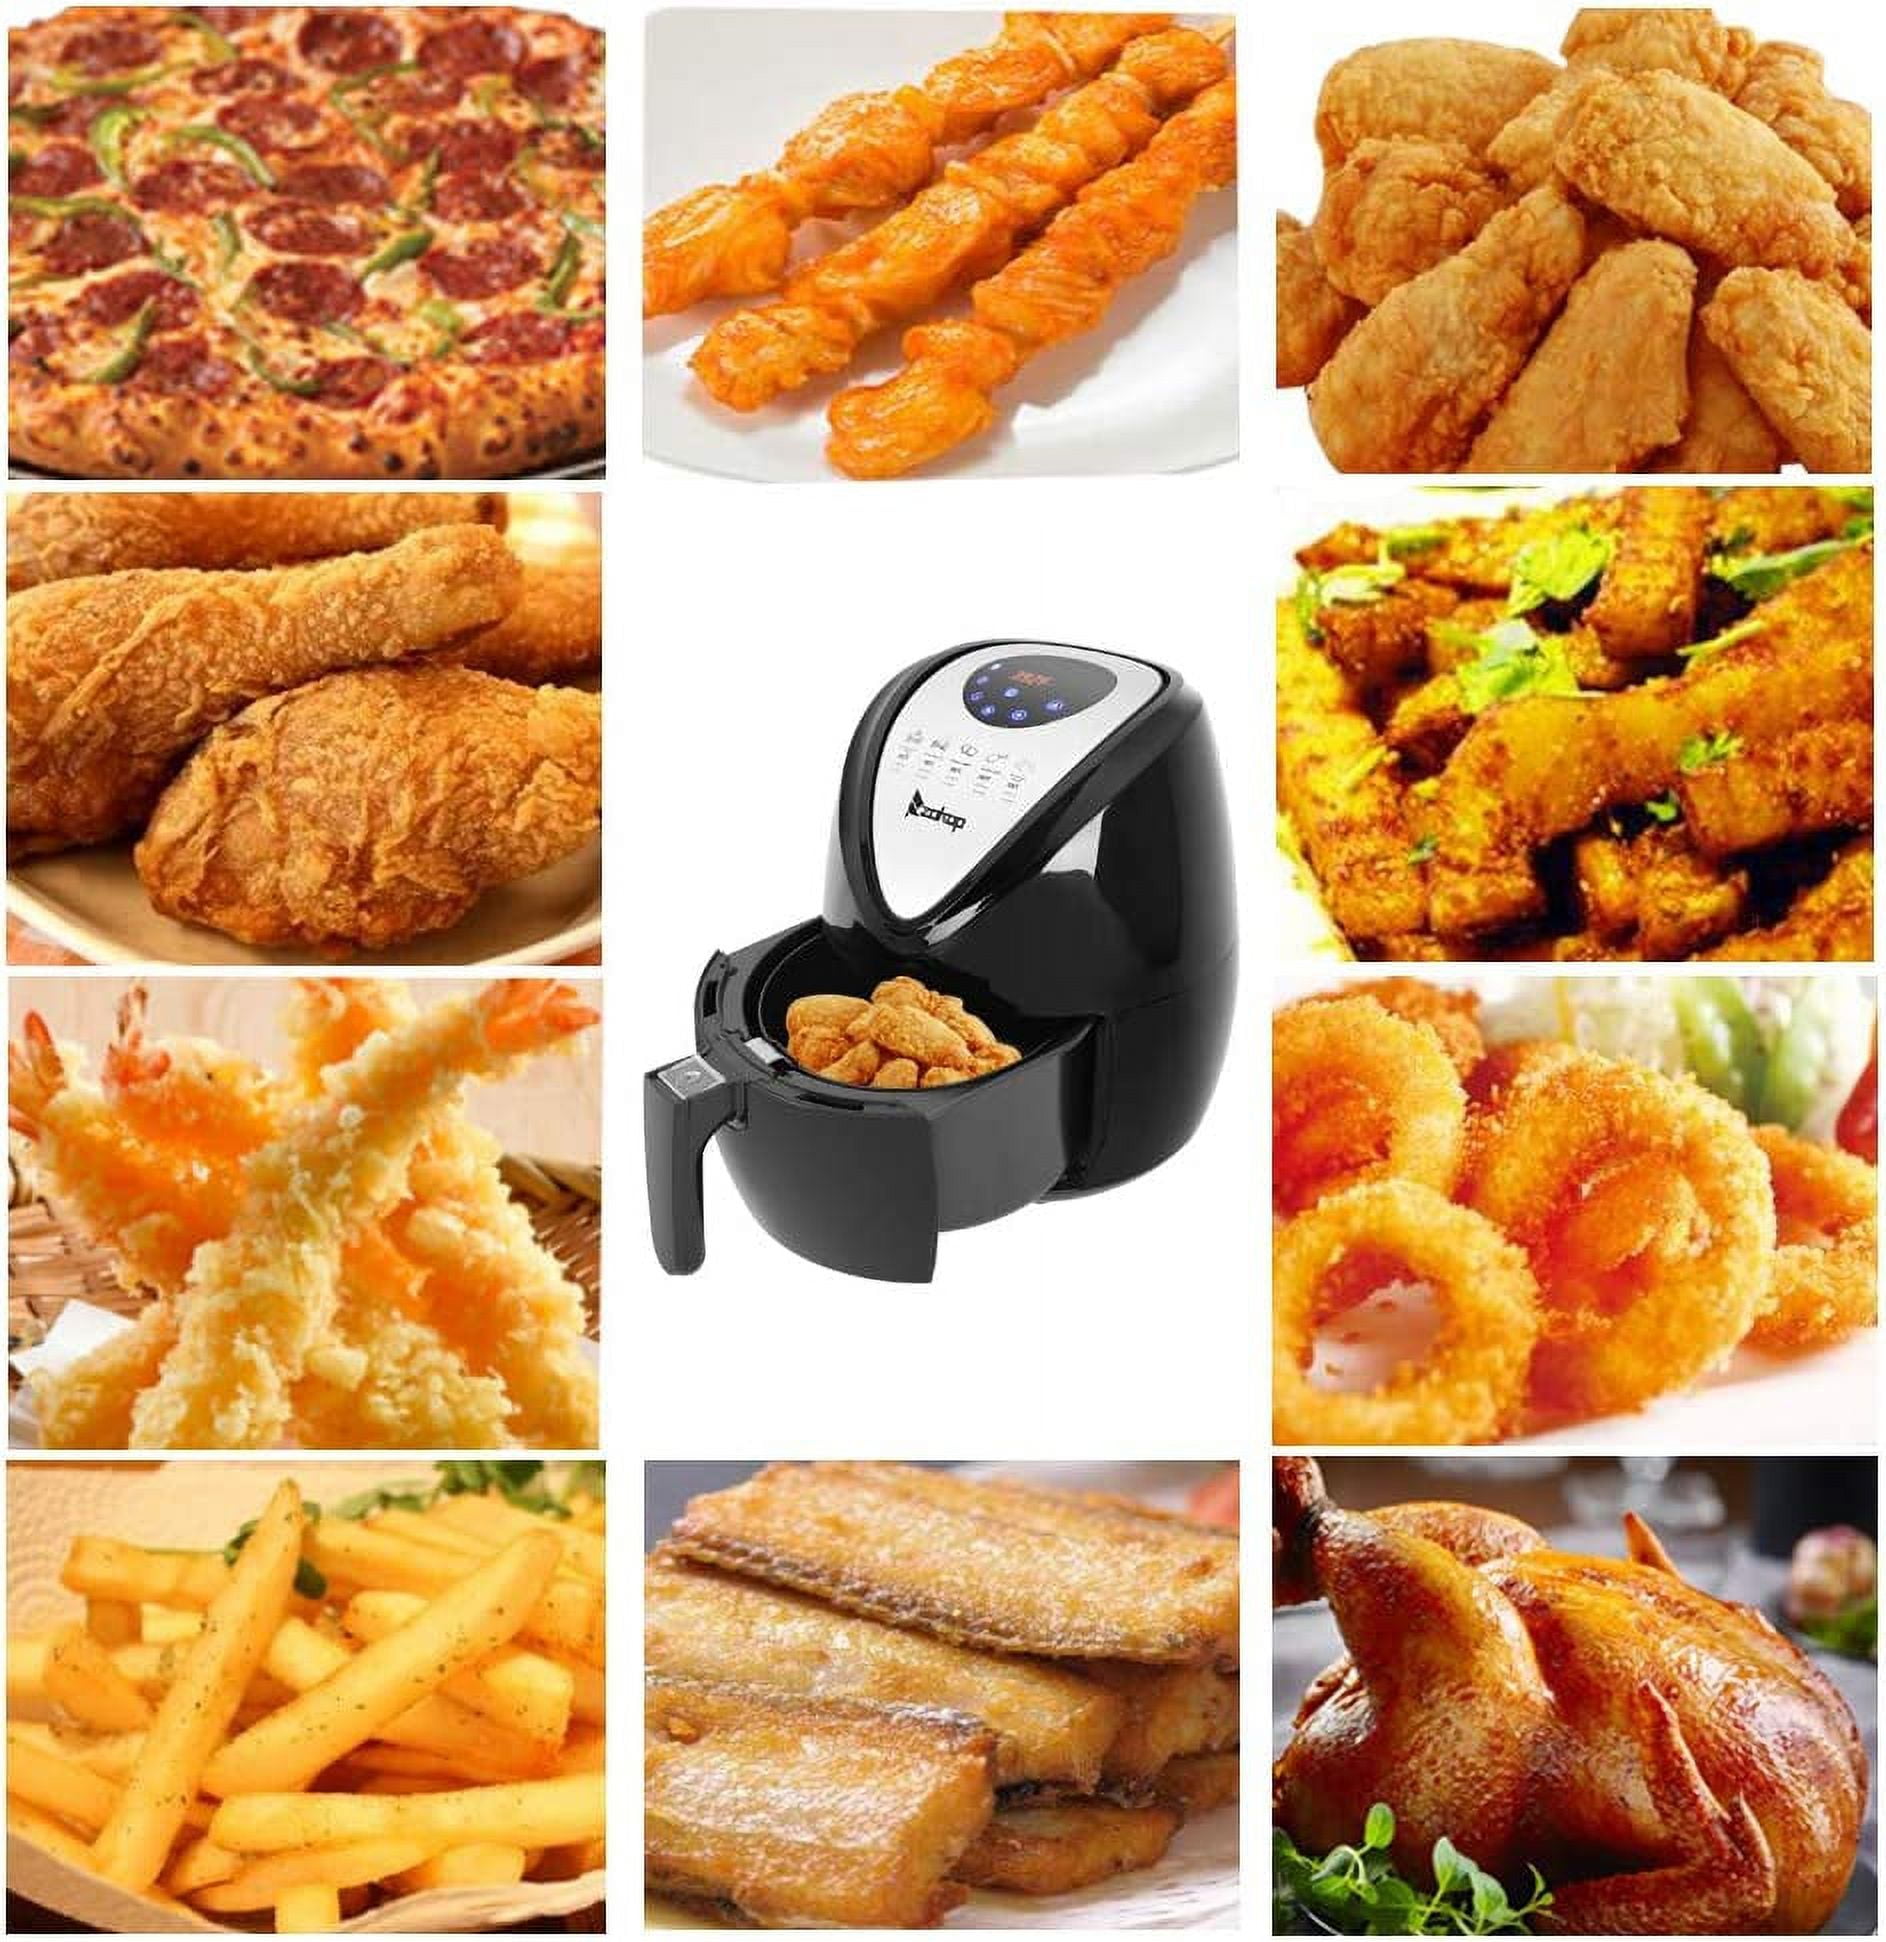 ROWAN Electric Appliance LLC: Clearance, Air Fryer for only $59.99, while  stocks last